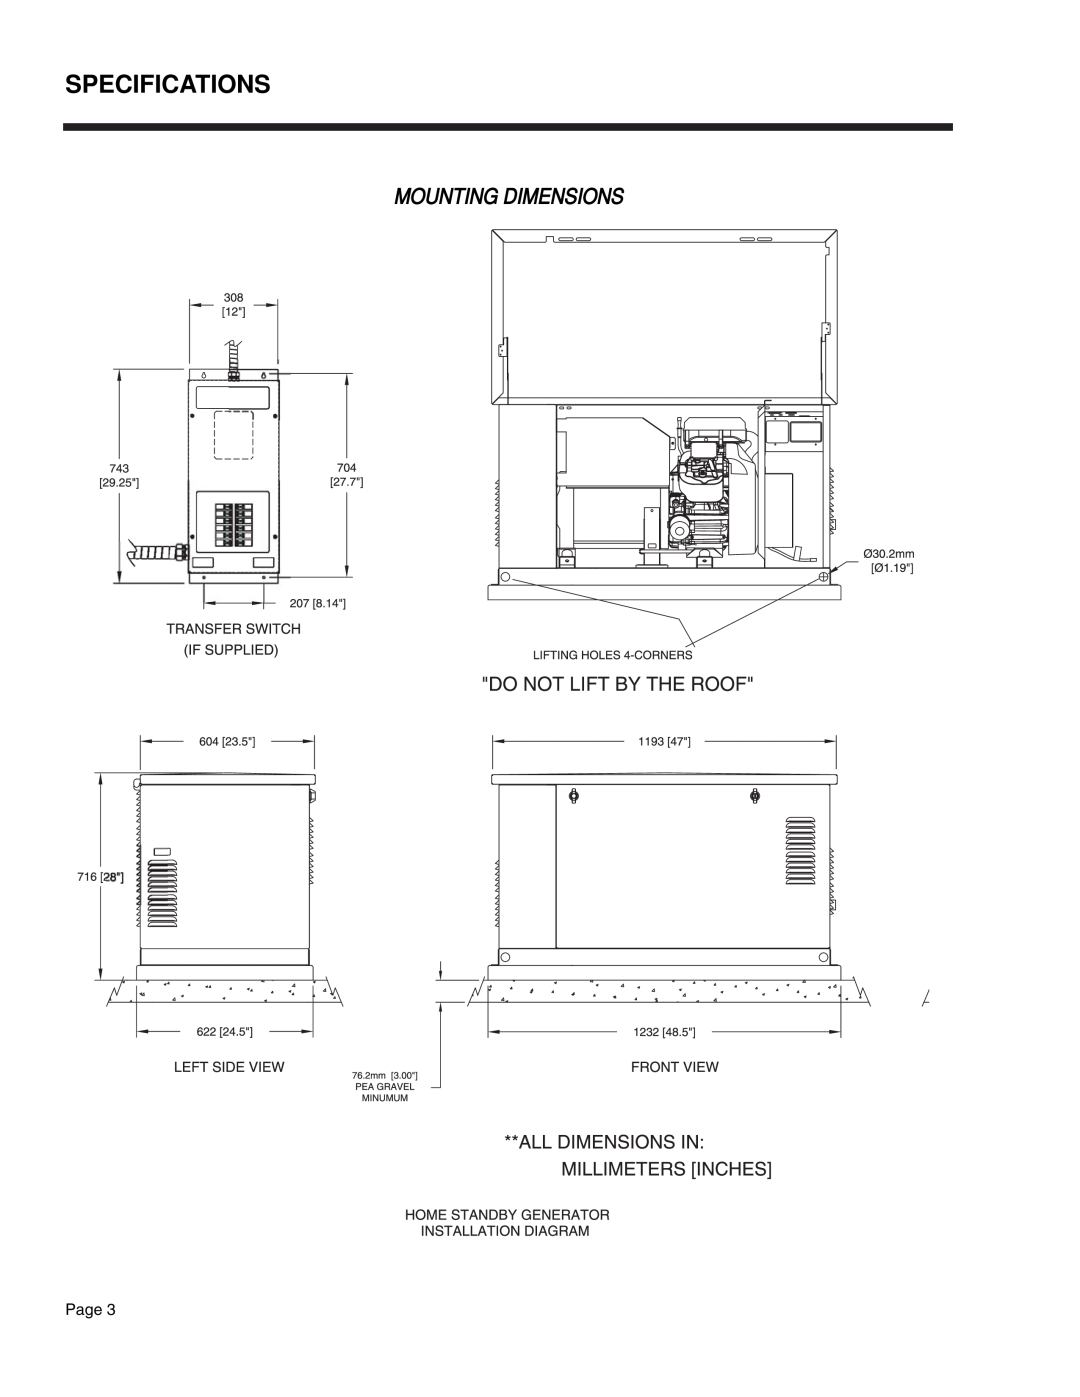 Guardian Technologies 4758, 4456, 4390, 4389, 4760, 4759 manual Specifications, Mounting Dimensions 